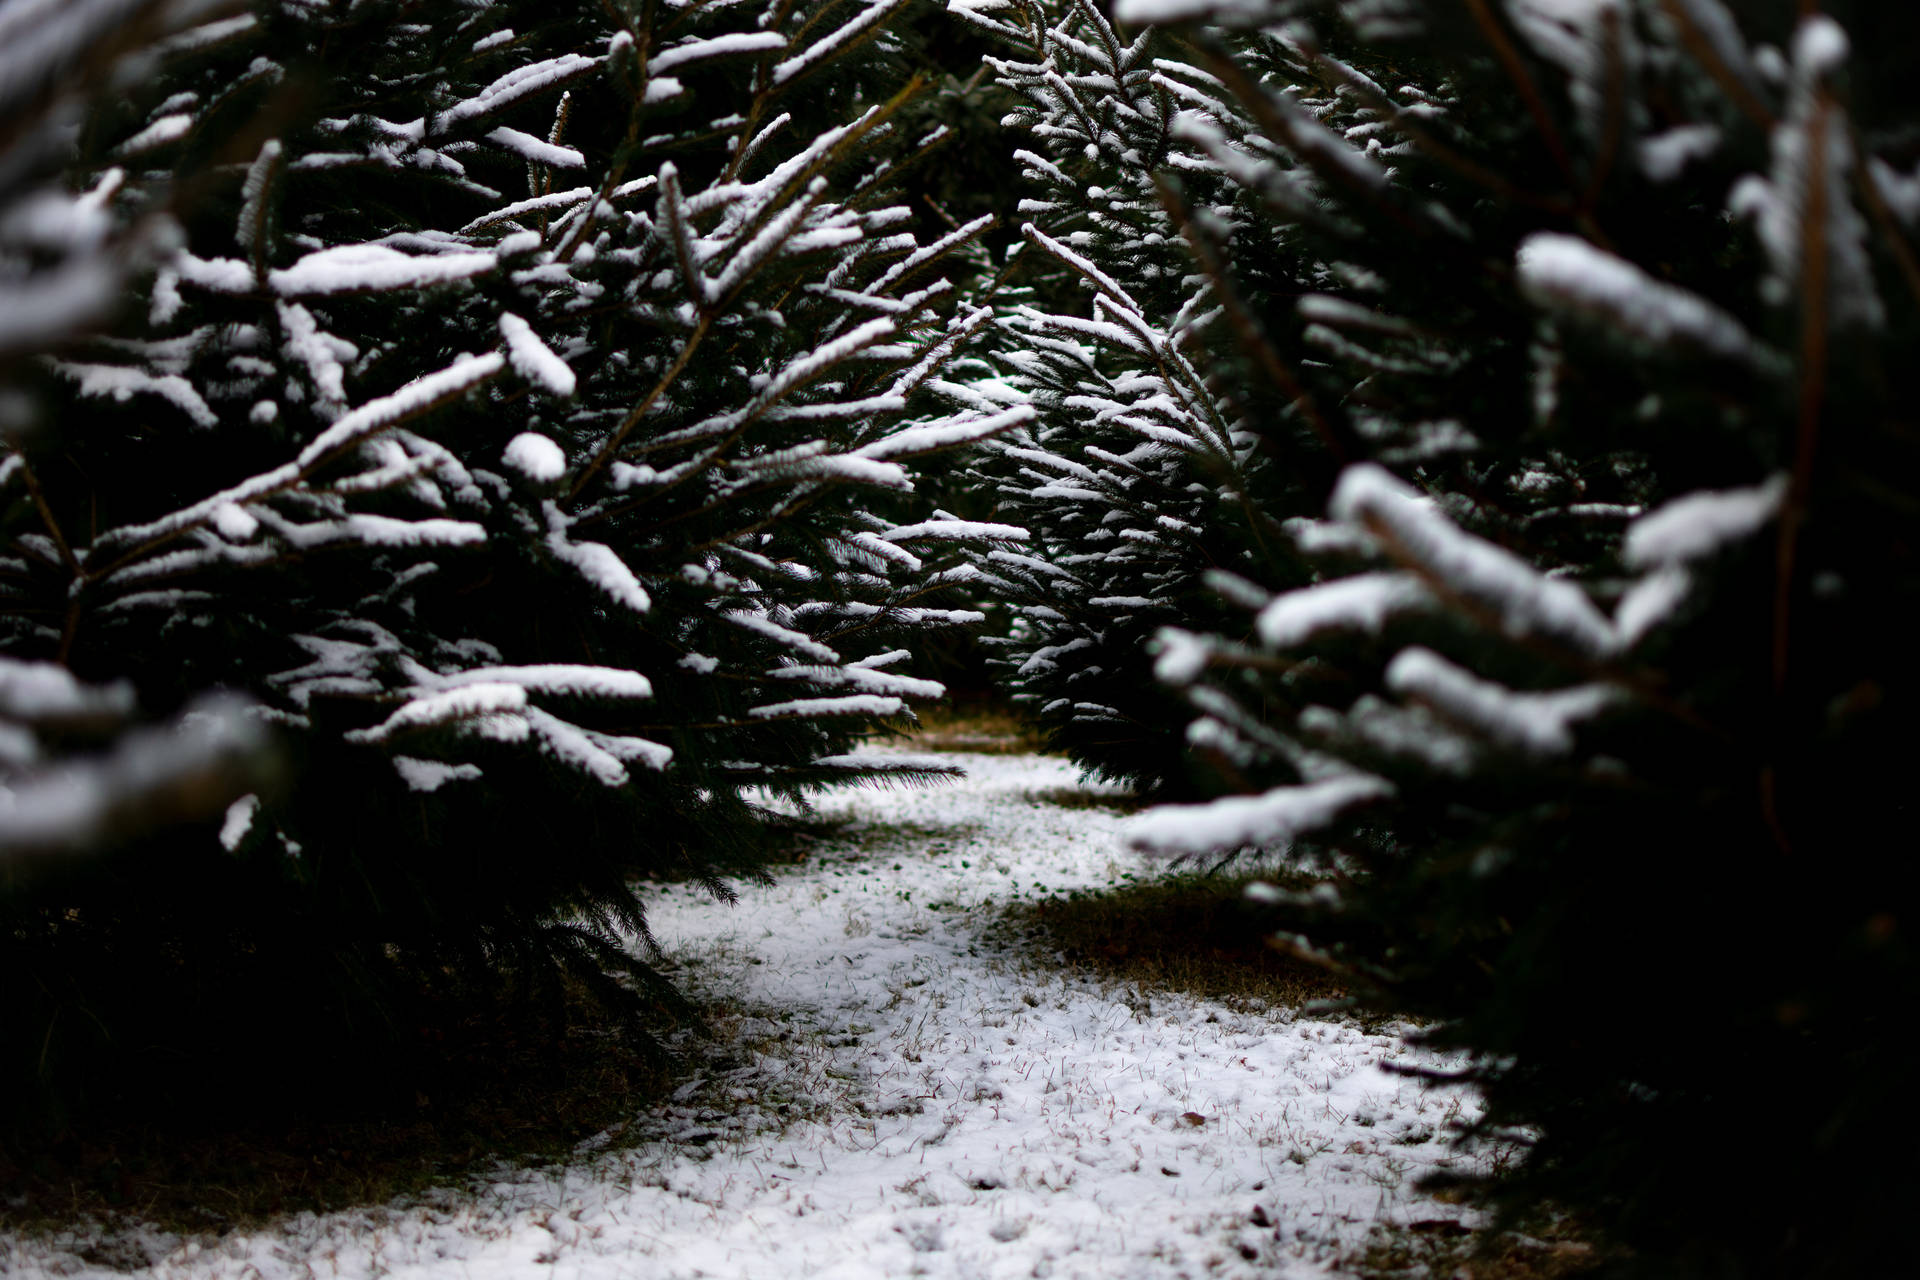 Winter tranquility - a scenic snow-covered forest path Wallpaper